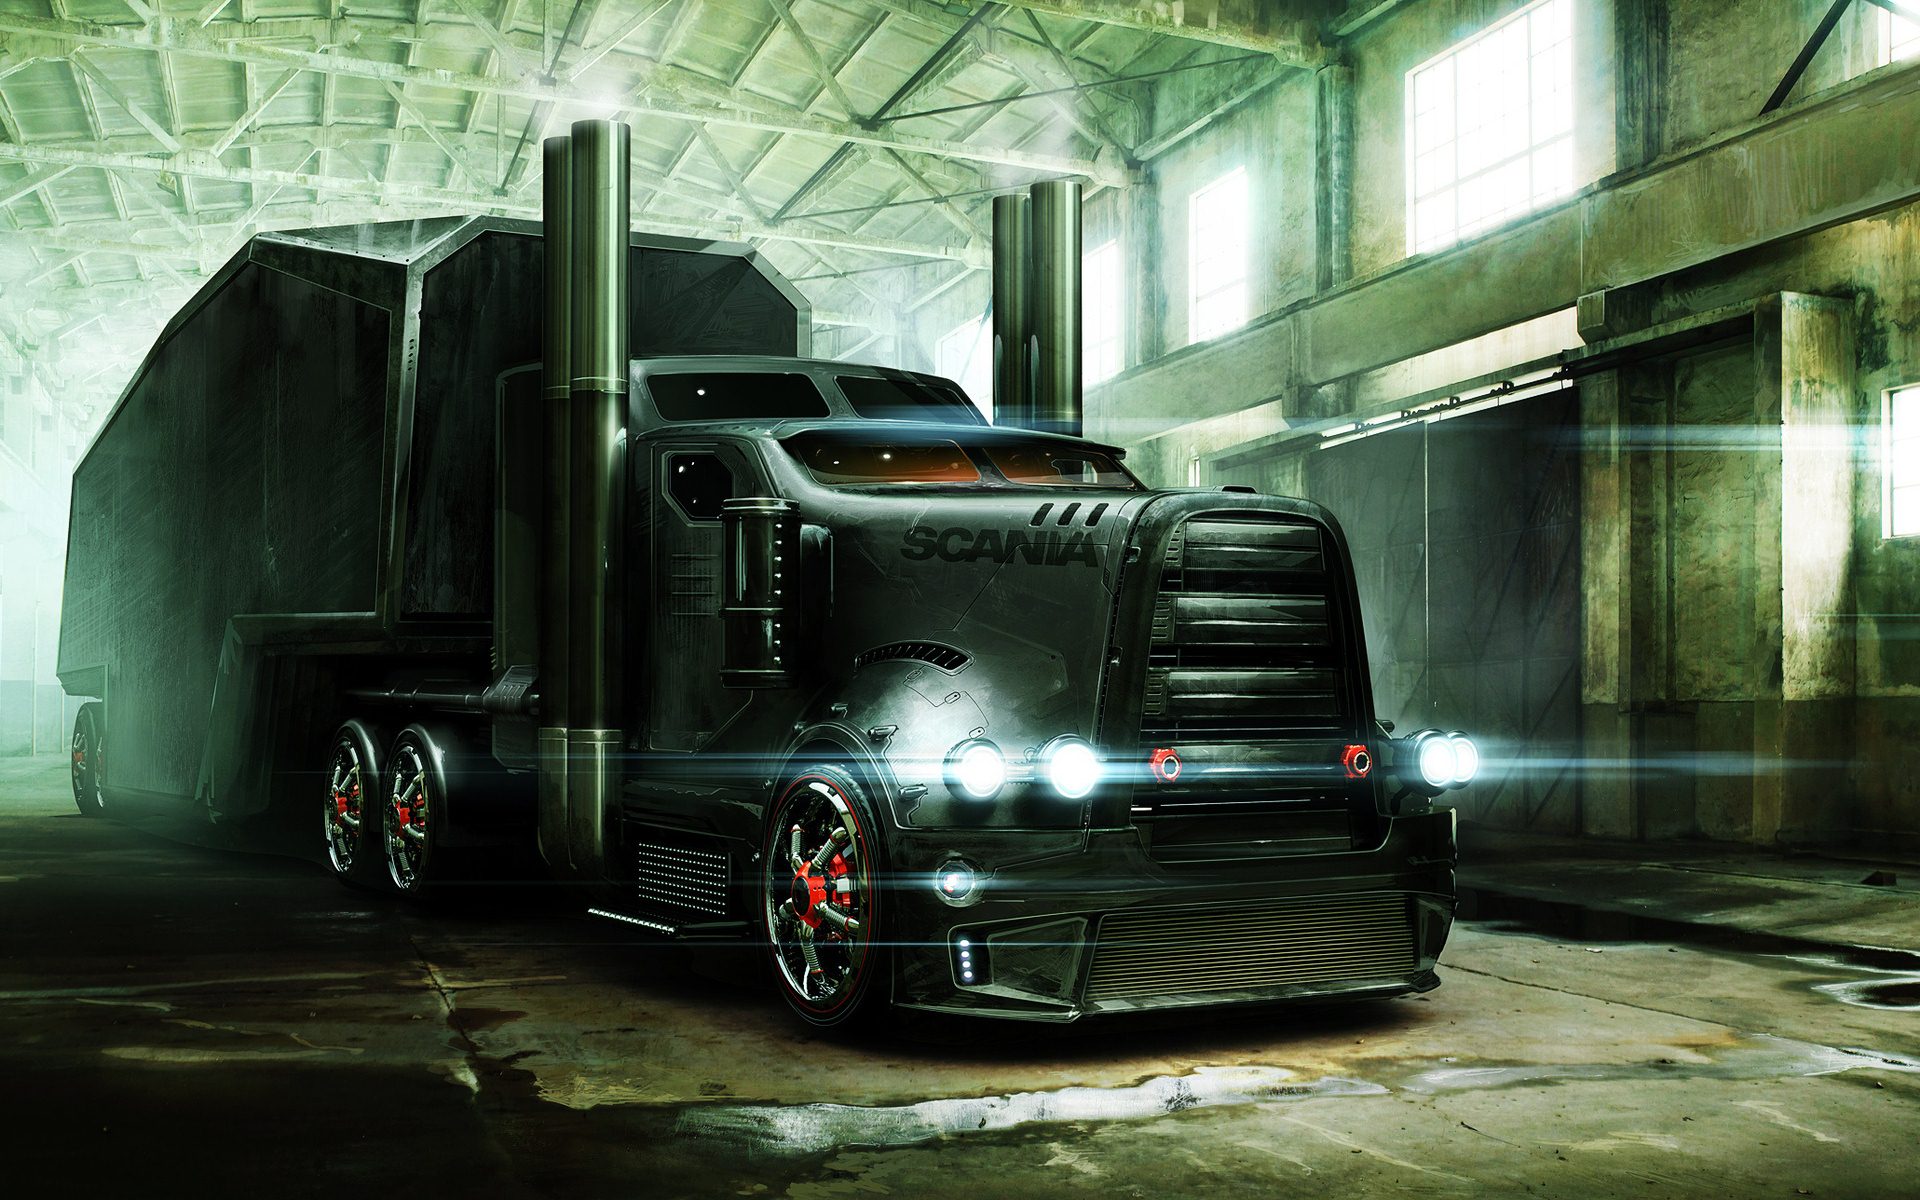 Download Truck wallpapers for mobile phone free Truck HD pictures